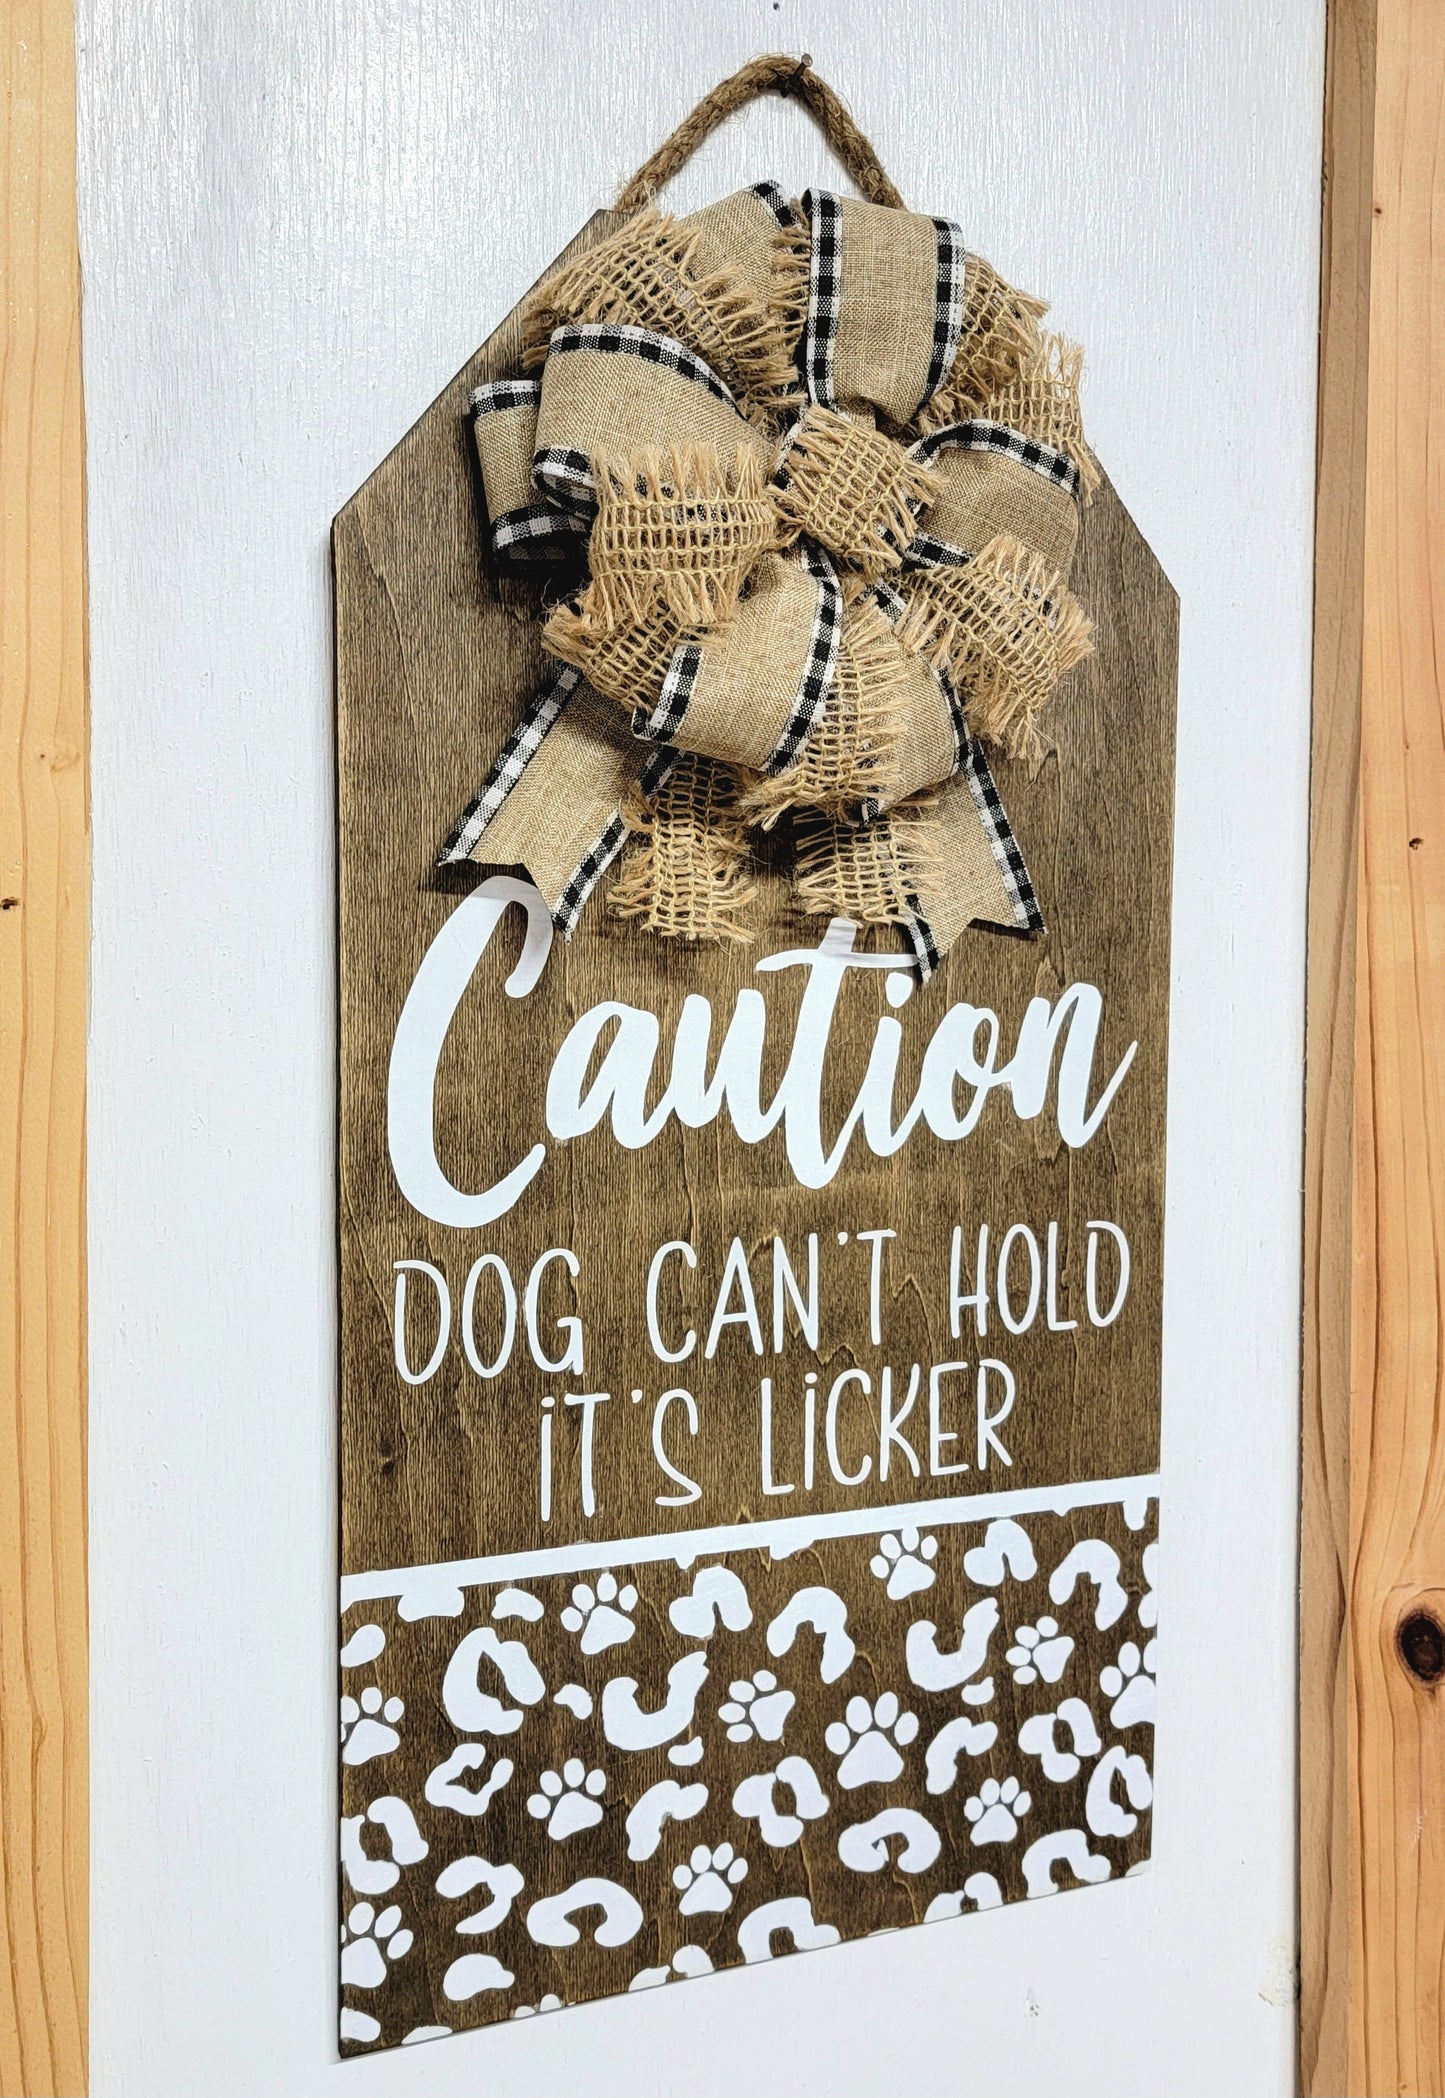 Dog Can't Hold Licker